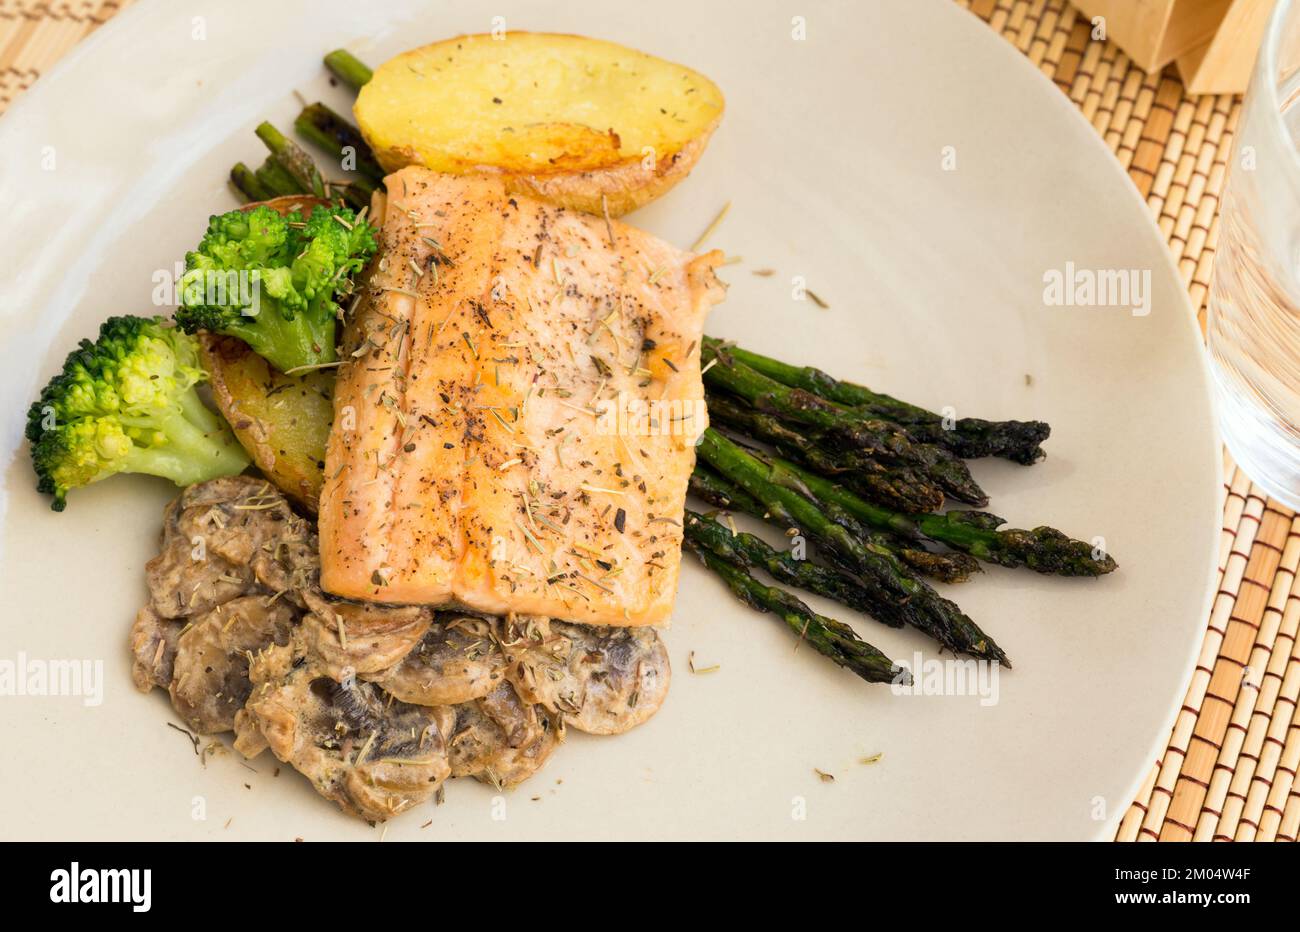 dish of fried river trout fillet with garnish of broccoli, asparagus sprouts and mushroom sauce Stock Photo